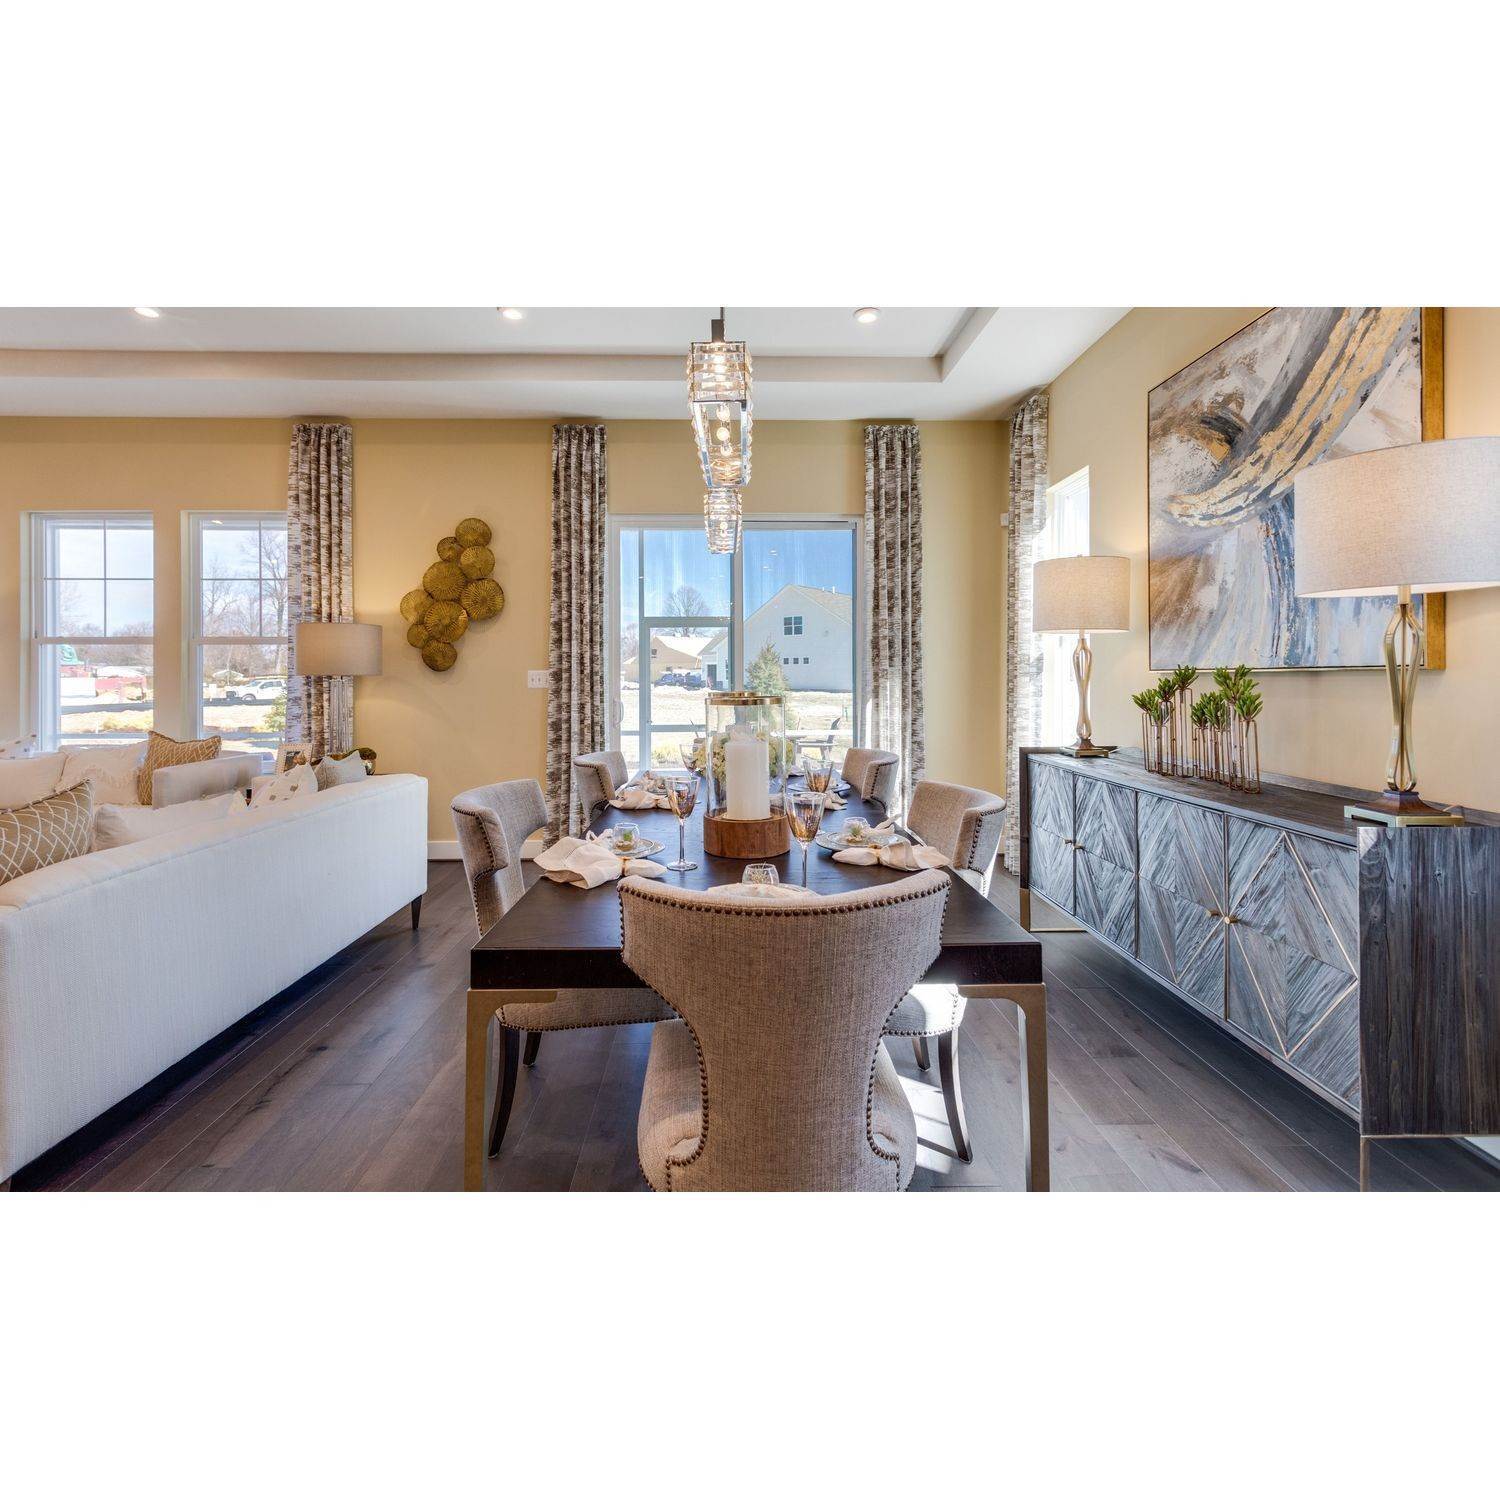 7. Single Family for Sale at K. Hovnanian's® Four Seasons At Kent Island - Sing 203 Bayberry Drive, Chester, MD 21619